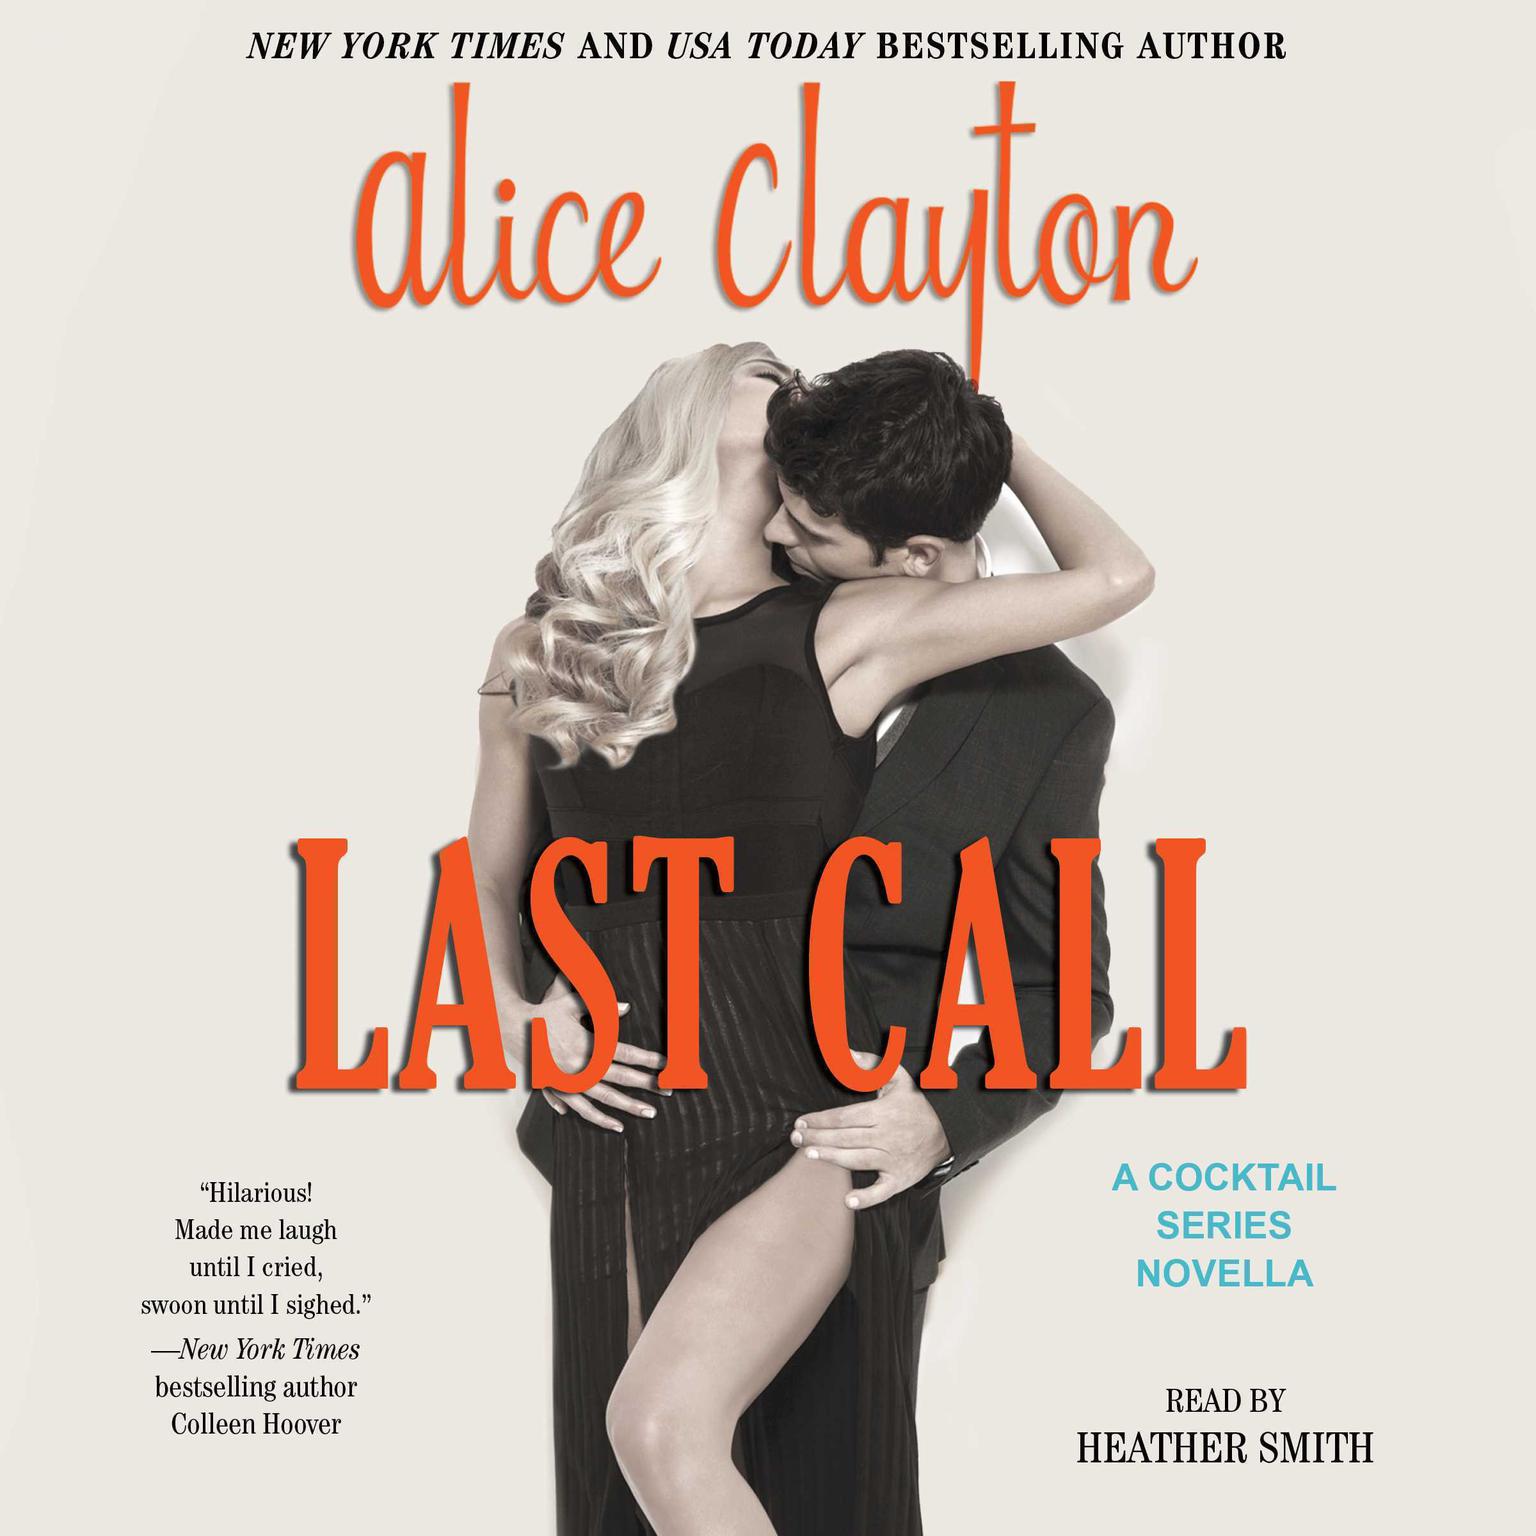 Last Call: A Cocktail Series Novella Audiobook, by Alice Clayton